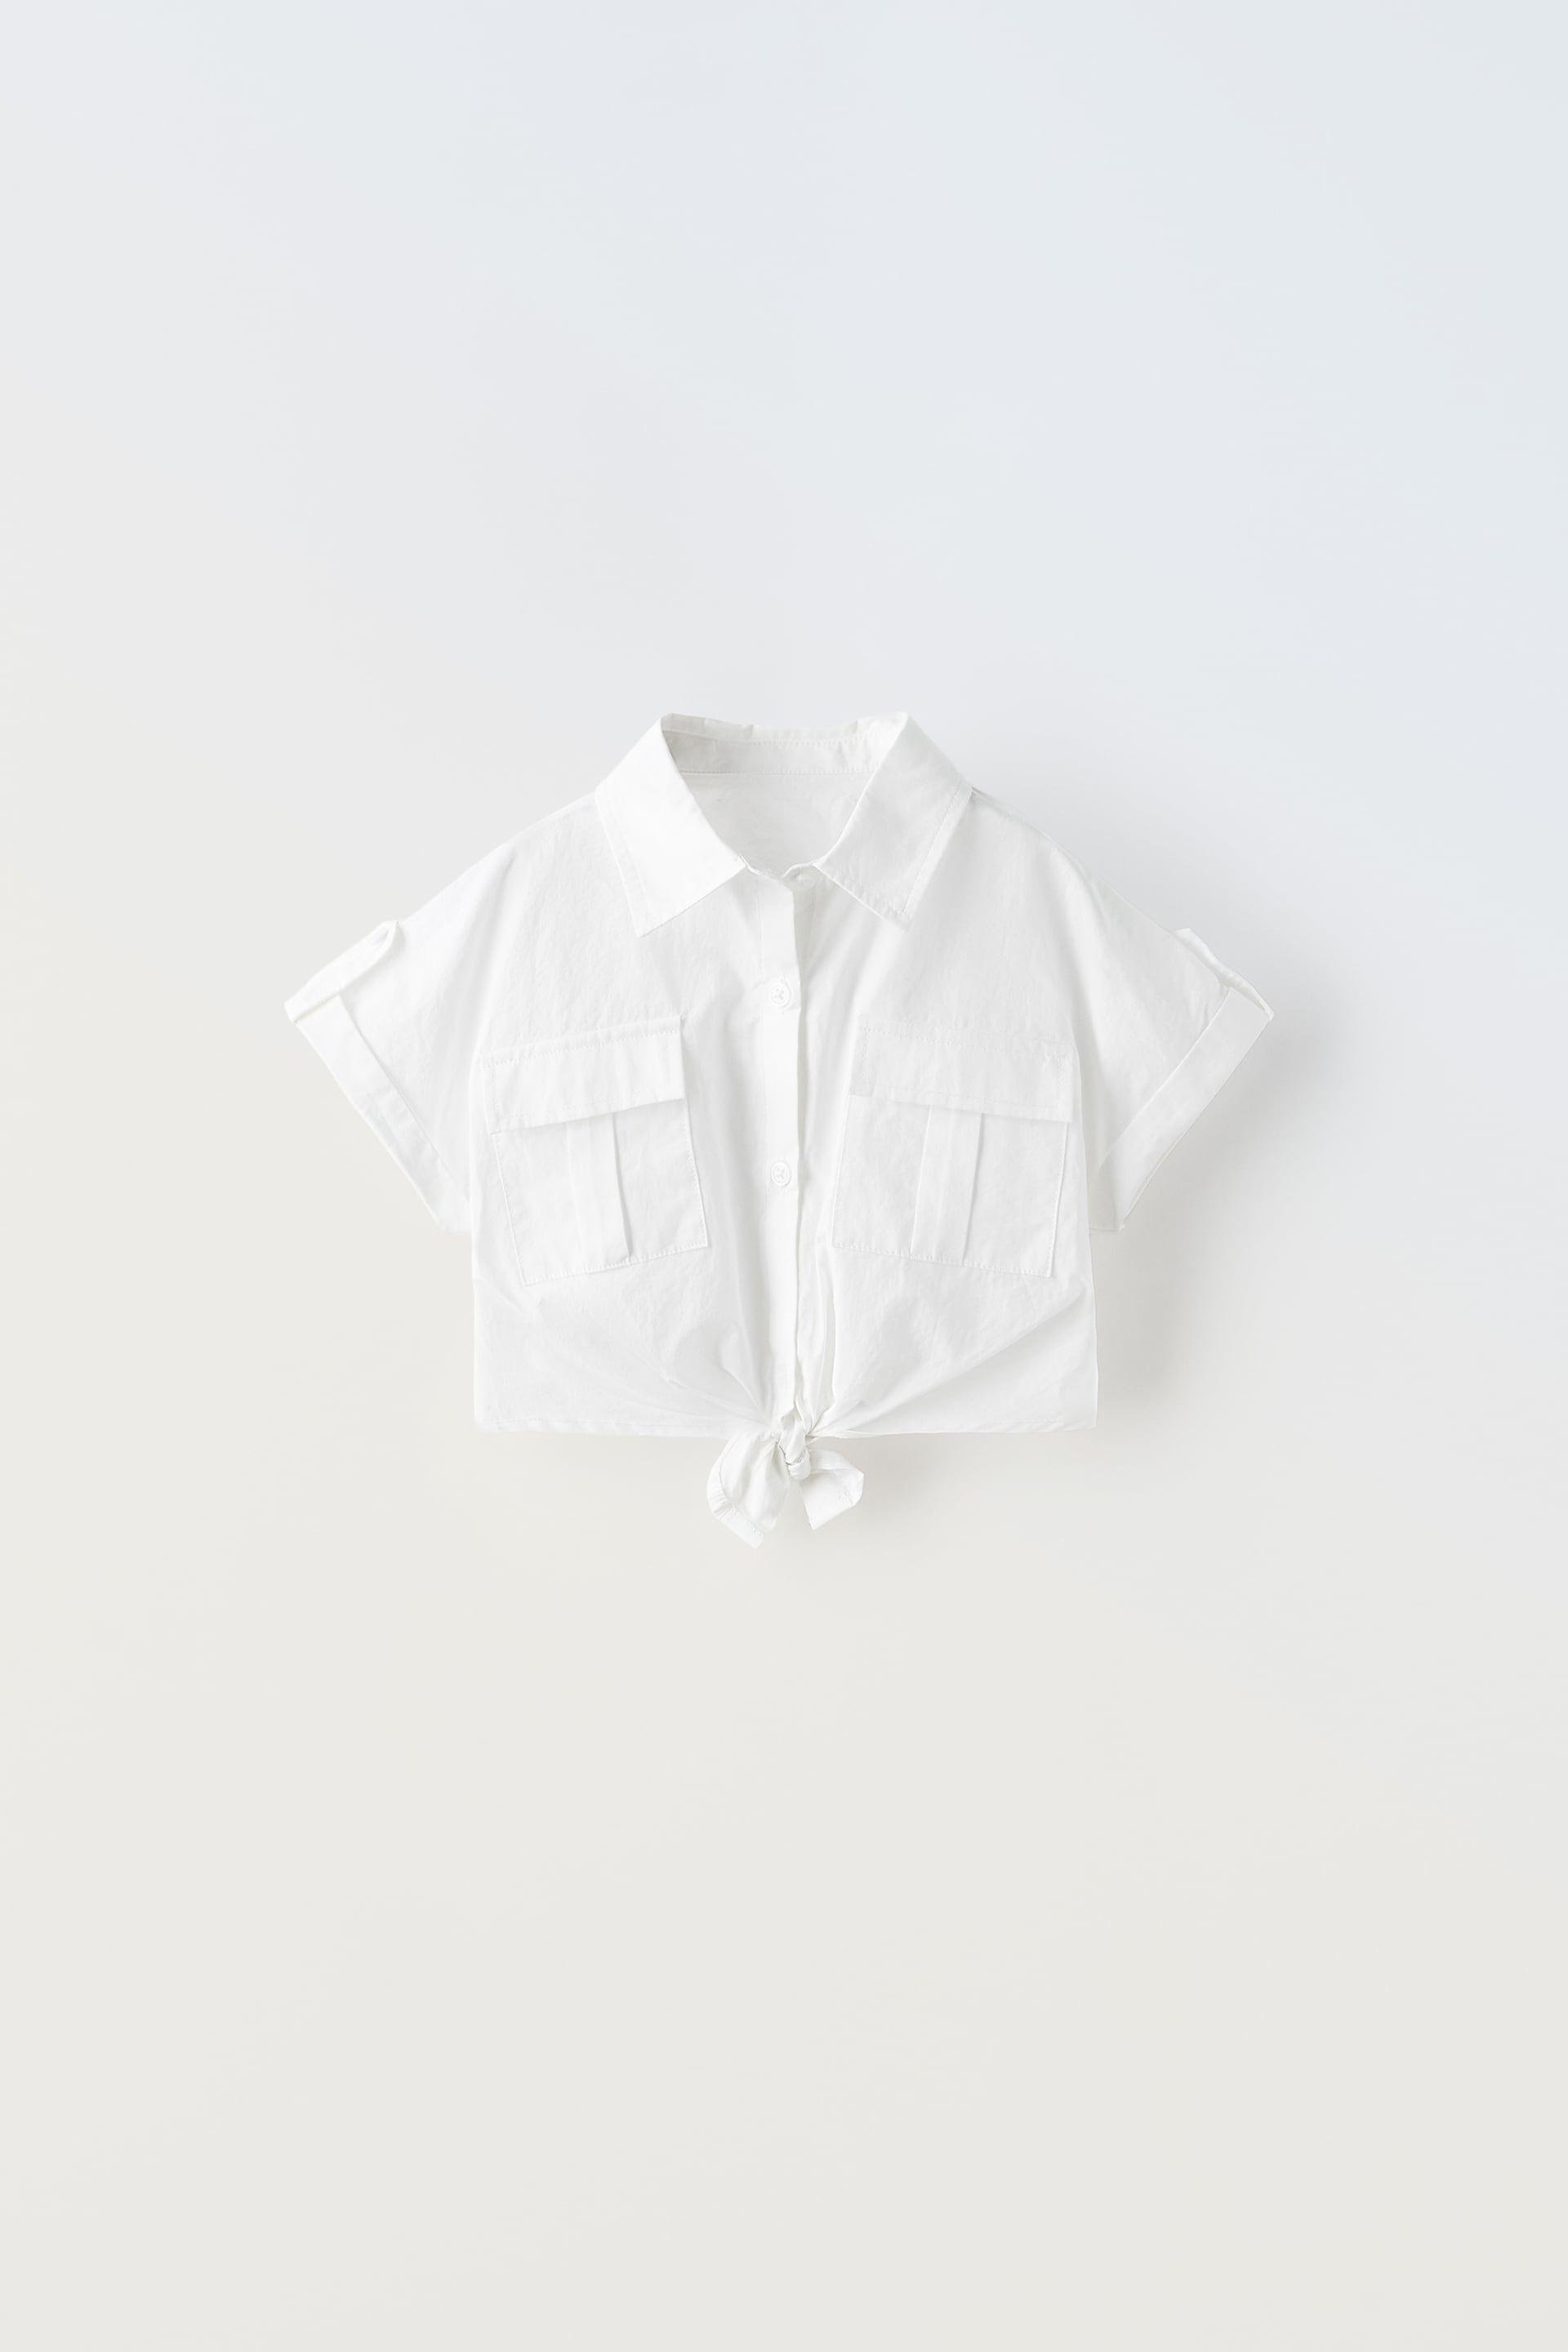 KNOTTED SHIRT by ZARA